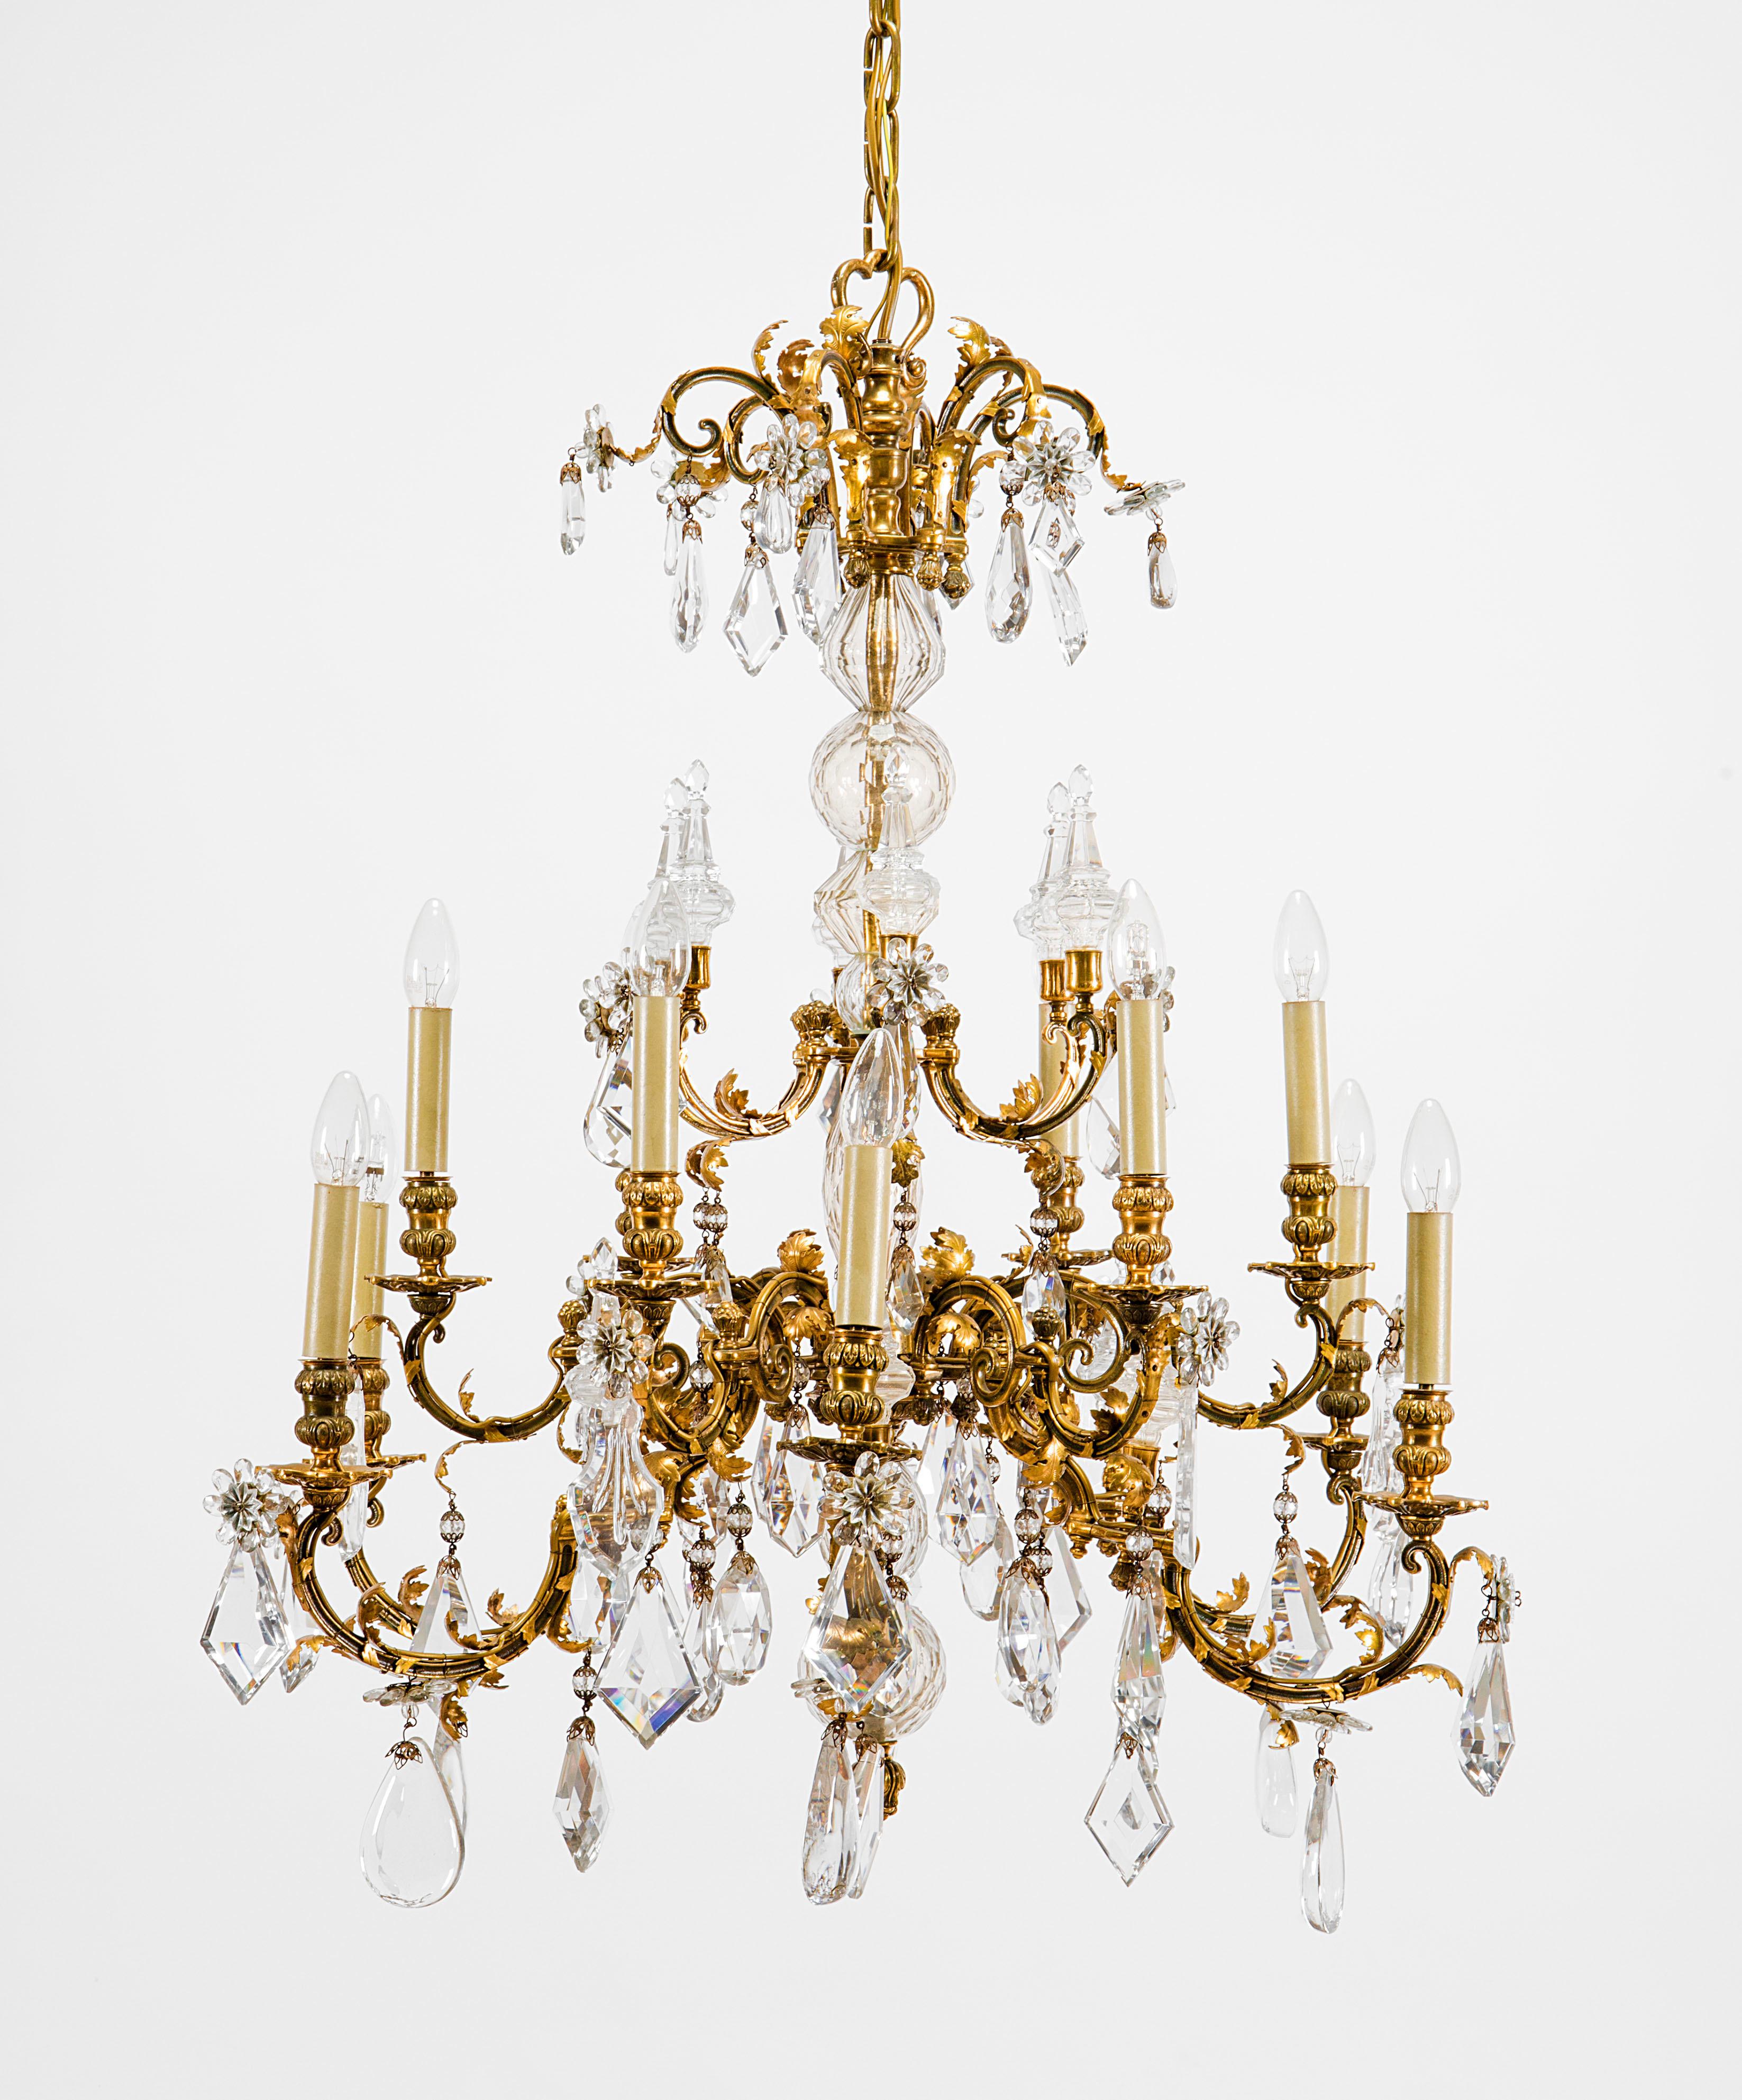 20th century, pair of French crystal and gilt bronze chandeliers by Maison Baguès

This pair of chandeliers was made in France in the early twentieth century, a work attributable to the manufacture of Paris Maison Baguès. The golden bronze